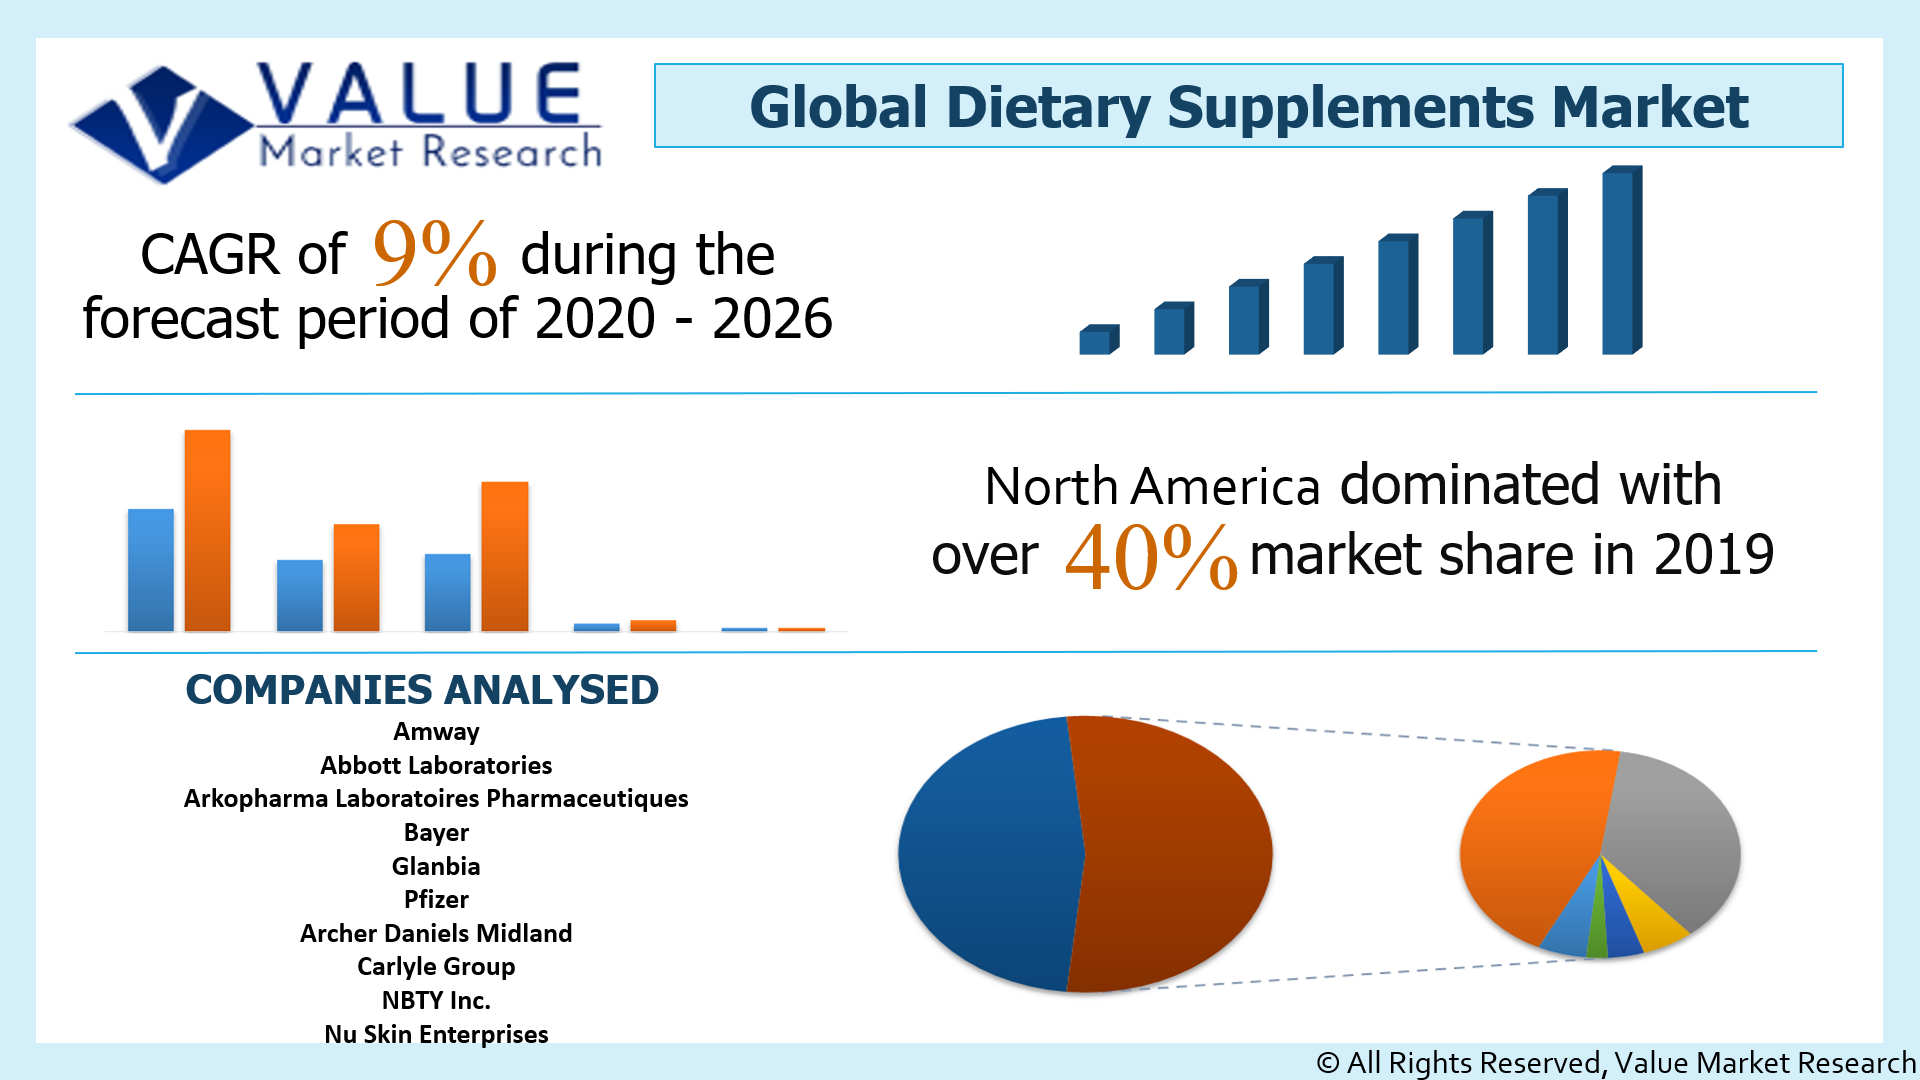 Global Dietary Supplements Market Share